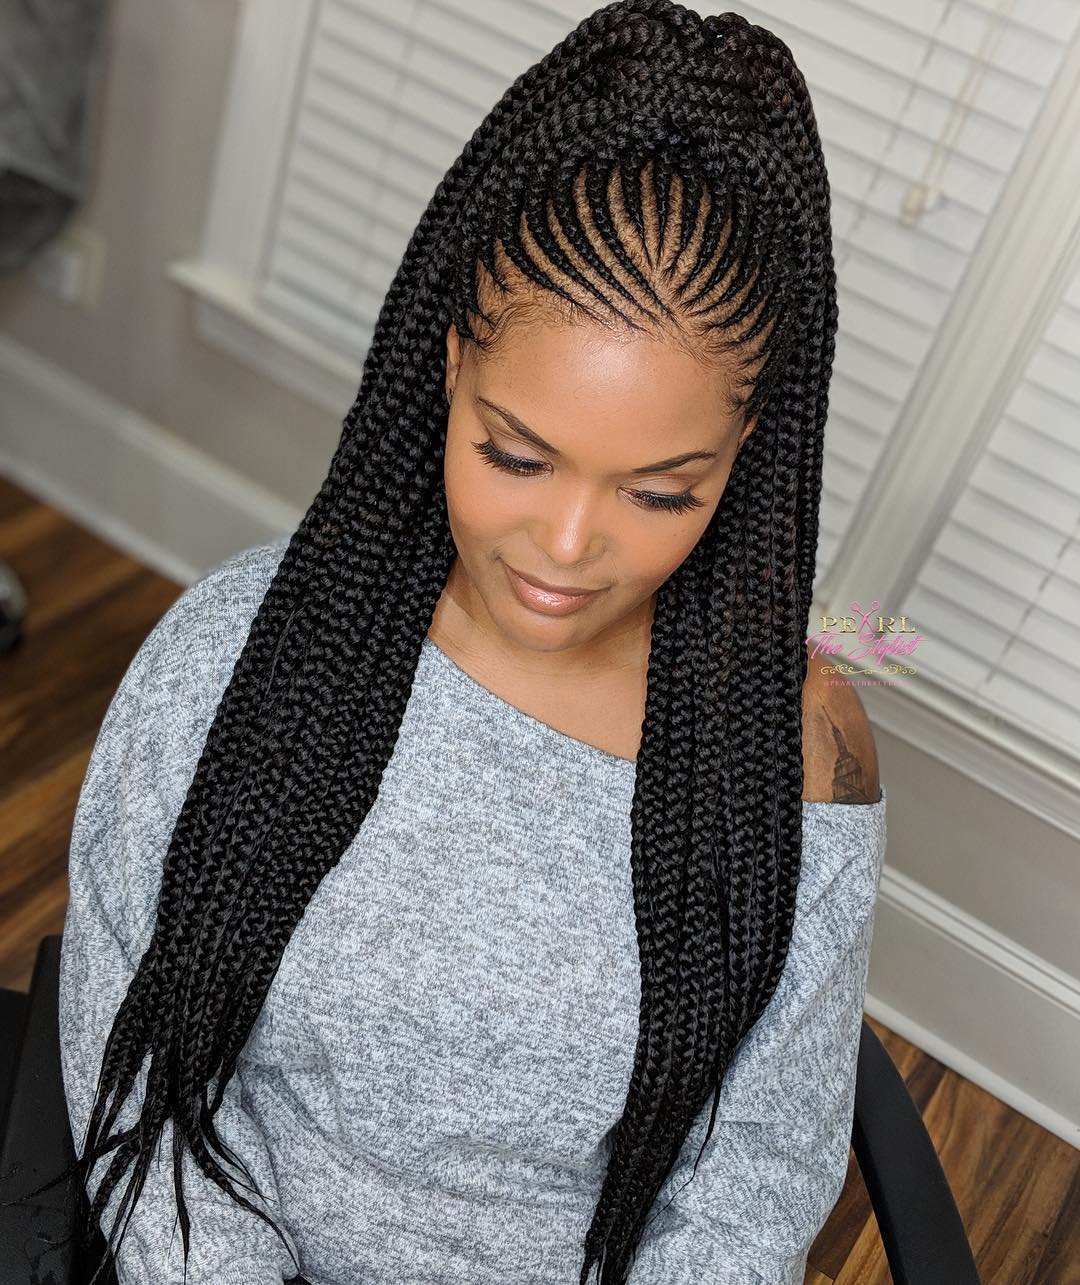 45 Pretty Braided Hairstyles for 2021 Looking Absolutely ...